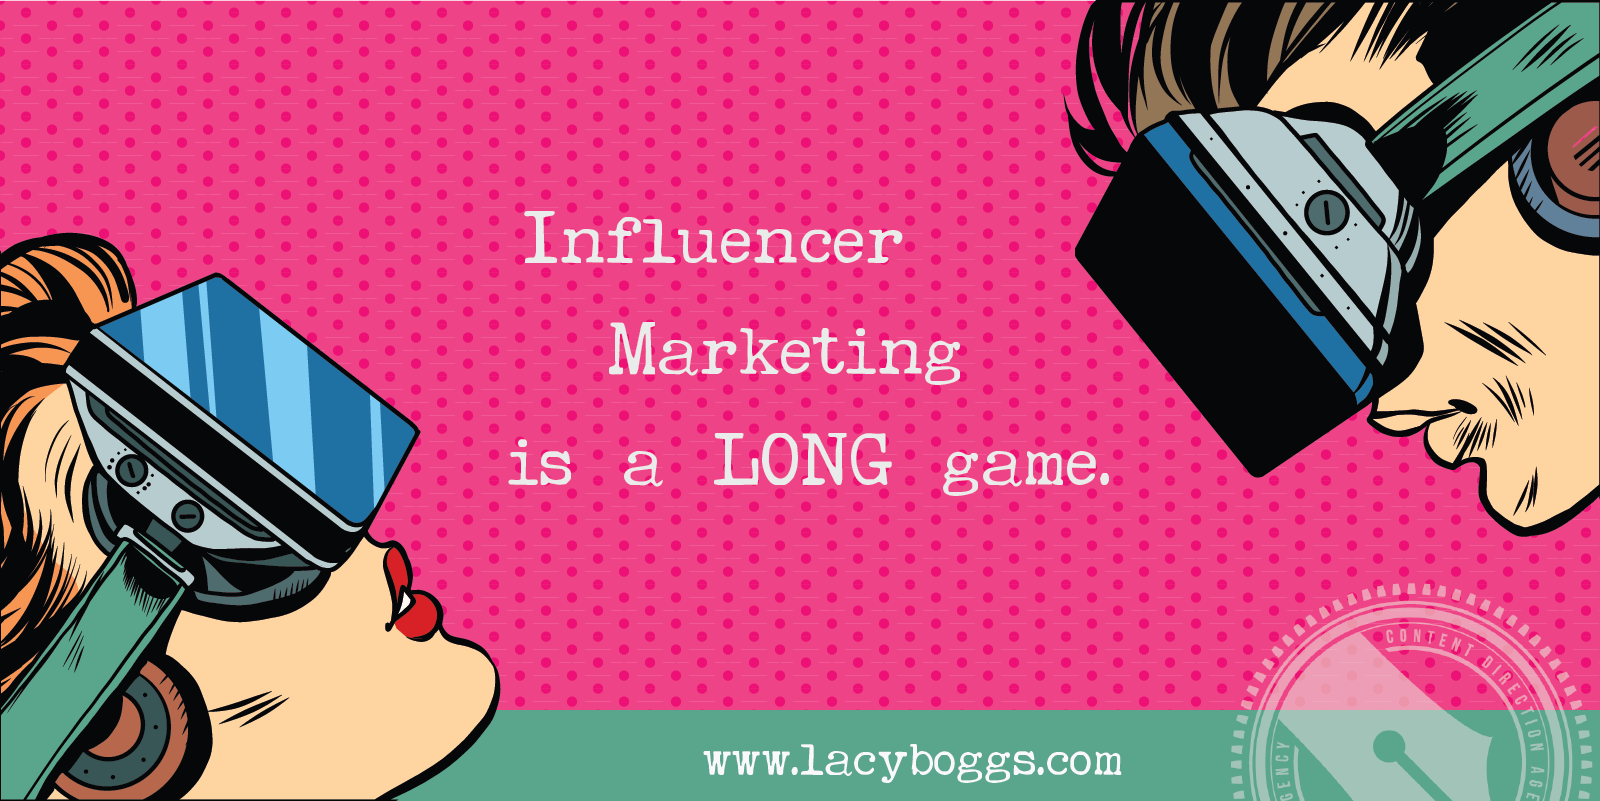 influencer marketing is a long game